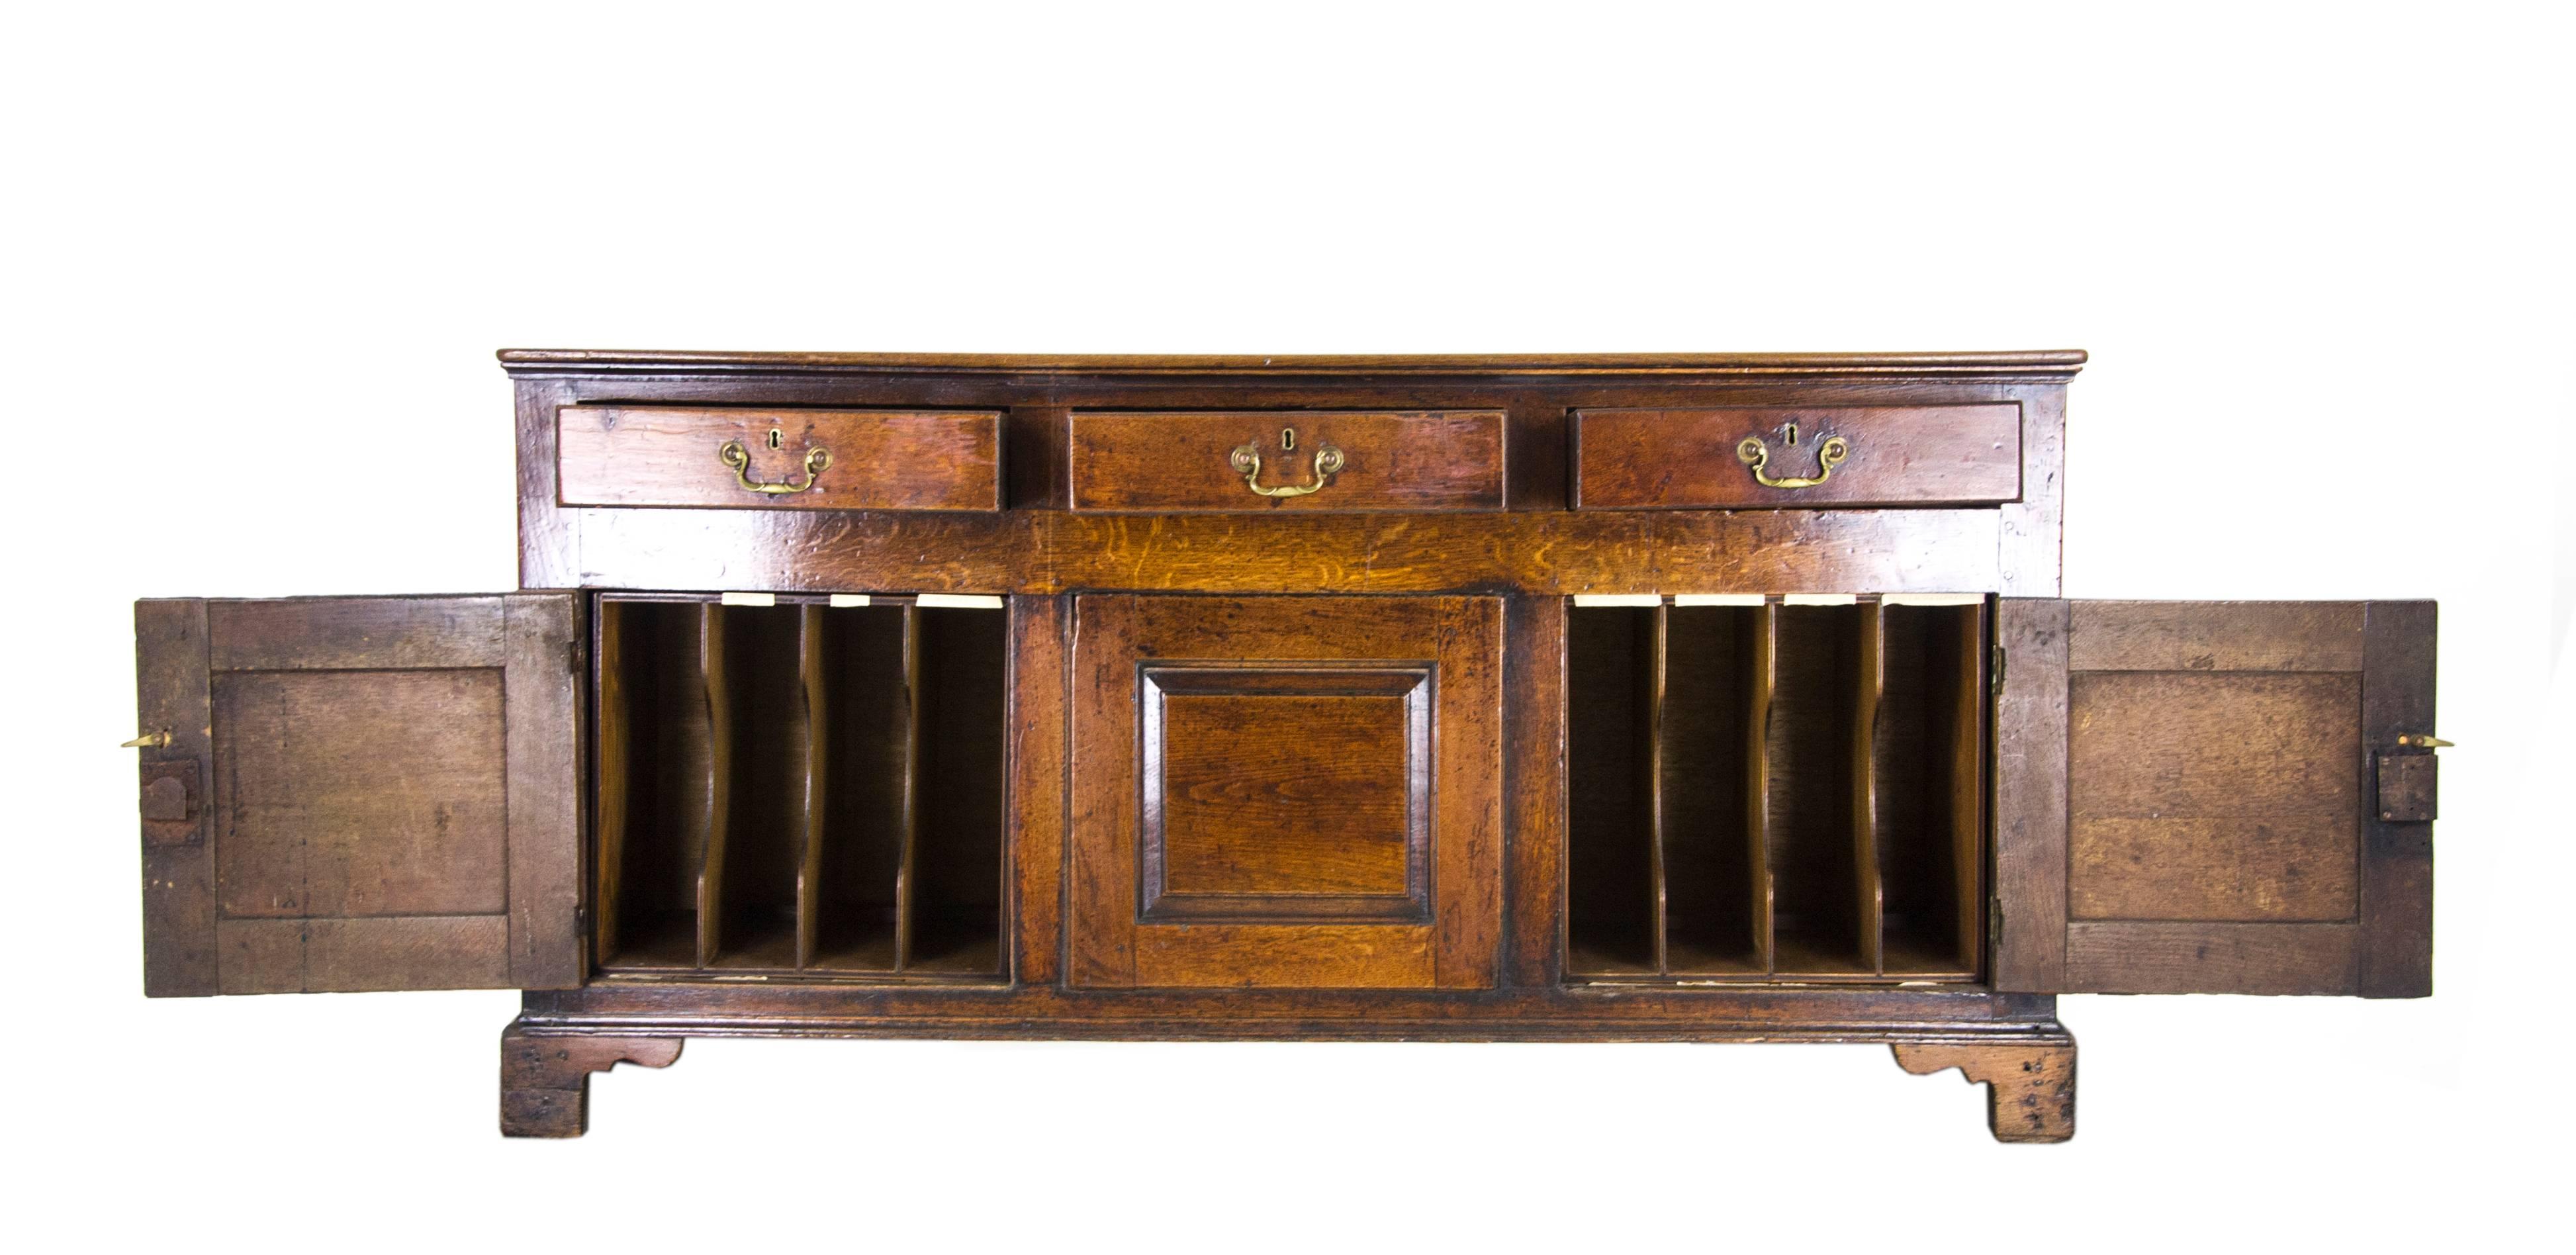 Antique oak sideboard oak dresser, England, 18th century

England, 18th century, 
Solid oak construction
Original finish
Rectangular top with three drawers below
Brass hardware
Two rectangular paneled doors
Flanking a central panel